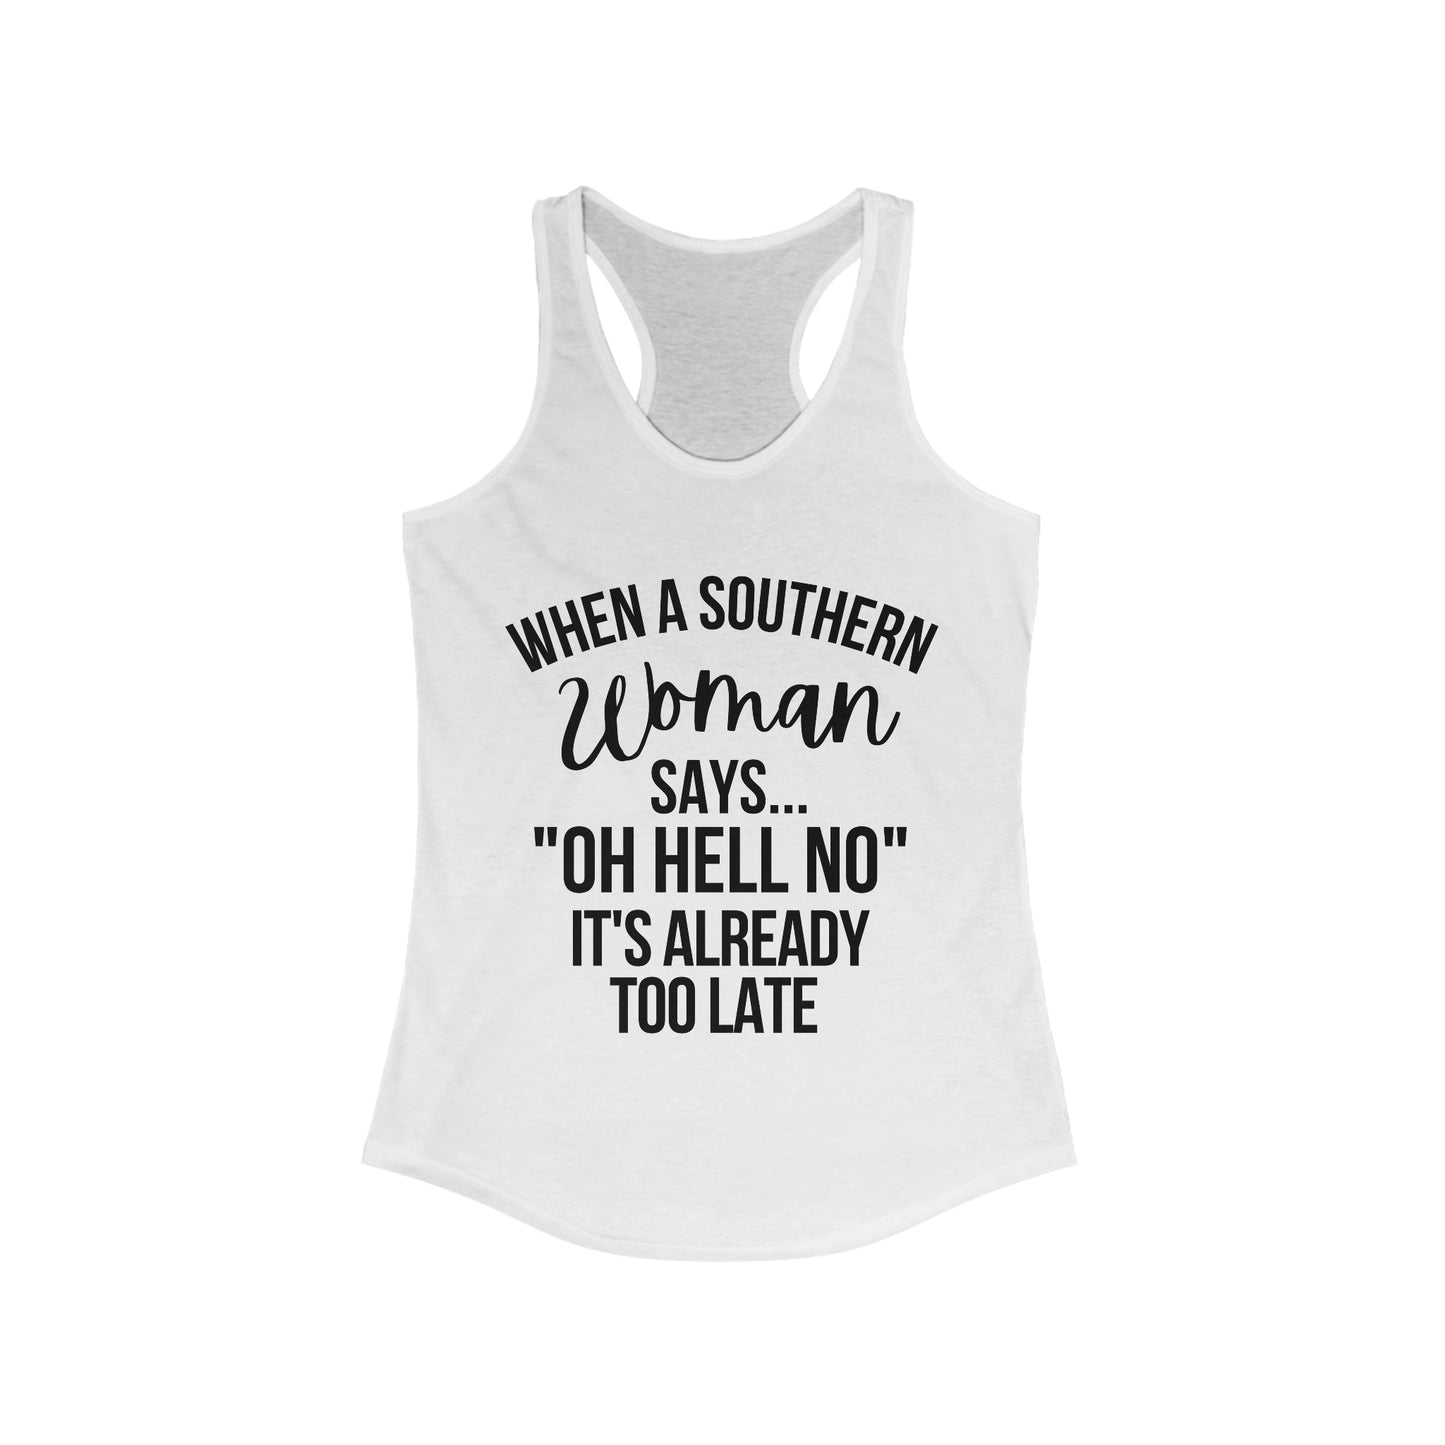 When A Southern Girls Says "OH HELL NO" It's Already Too Late Tank Top